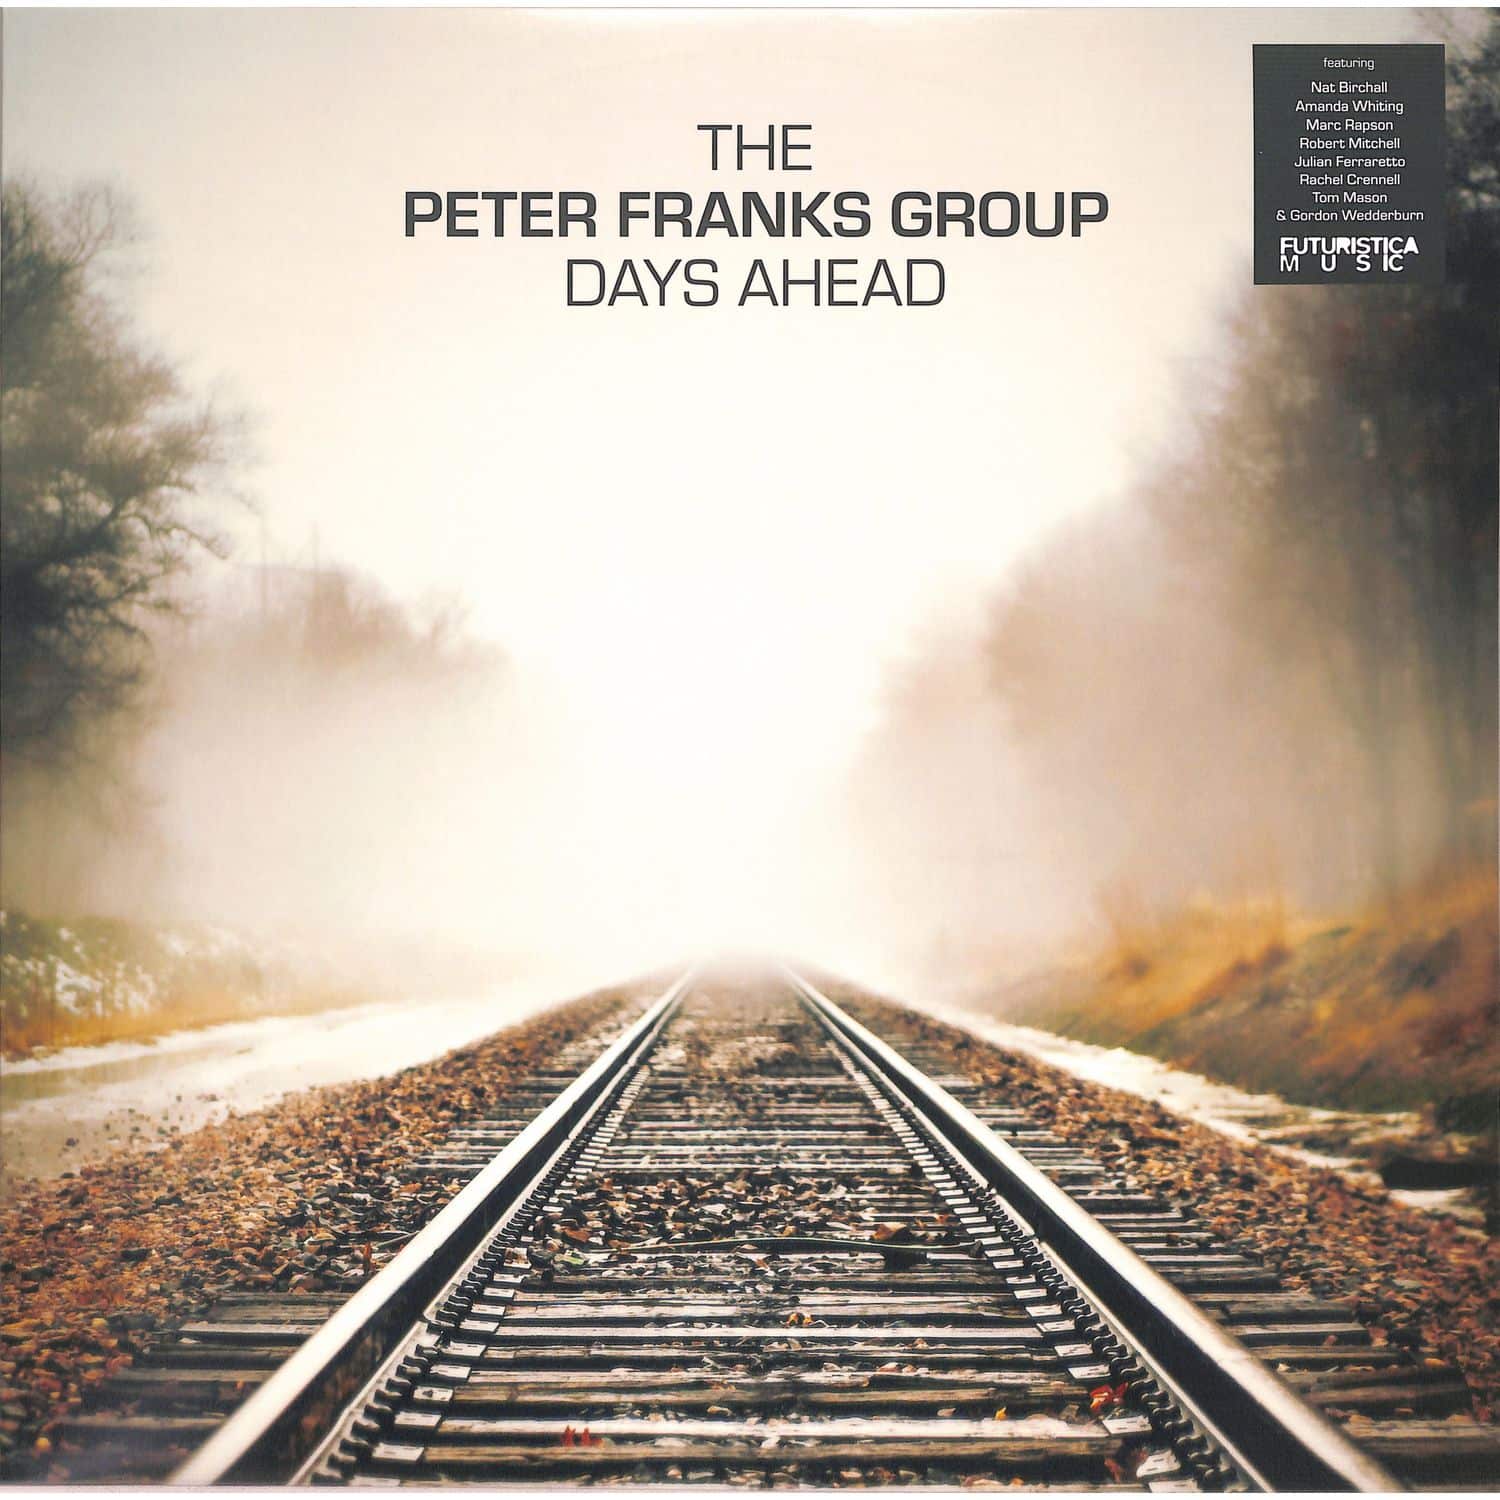 The Peter Franks Group - DAYS AHEAD